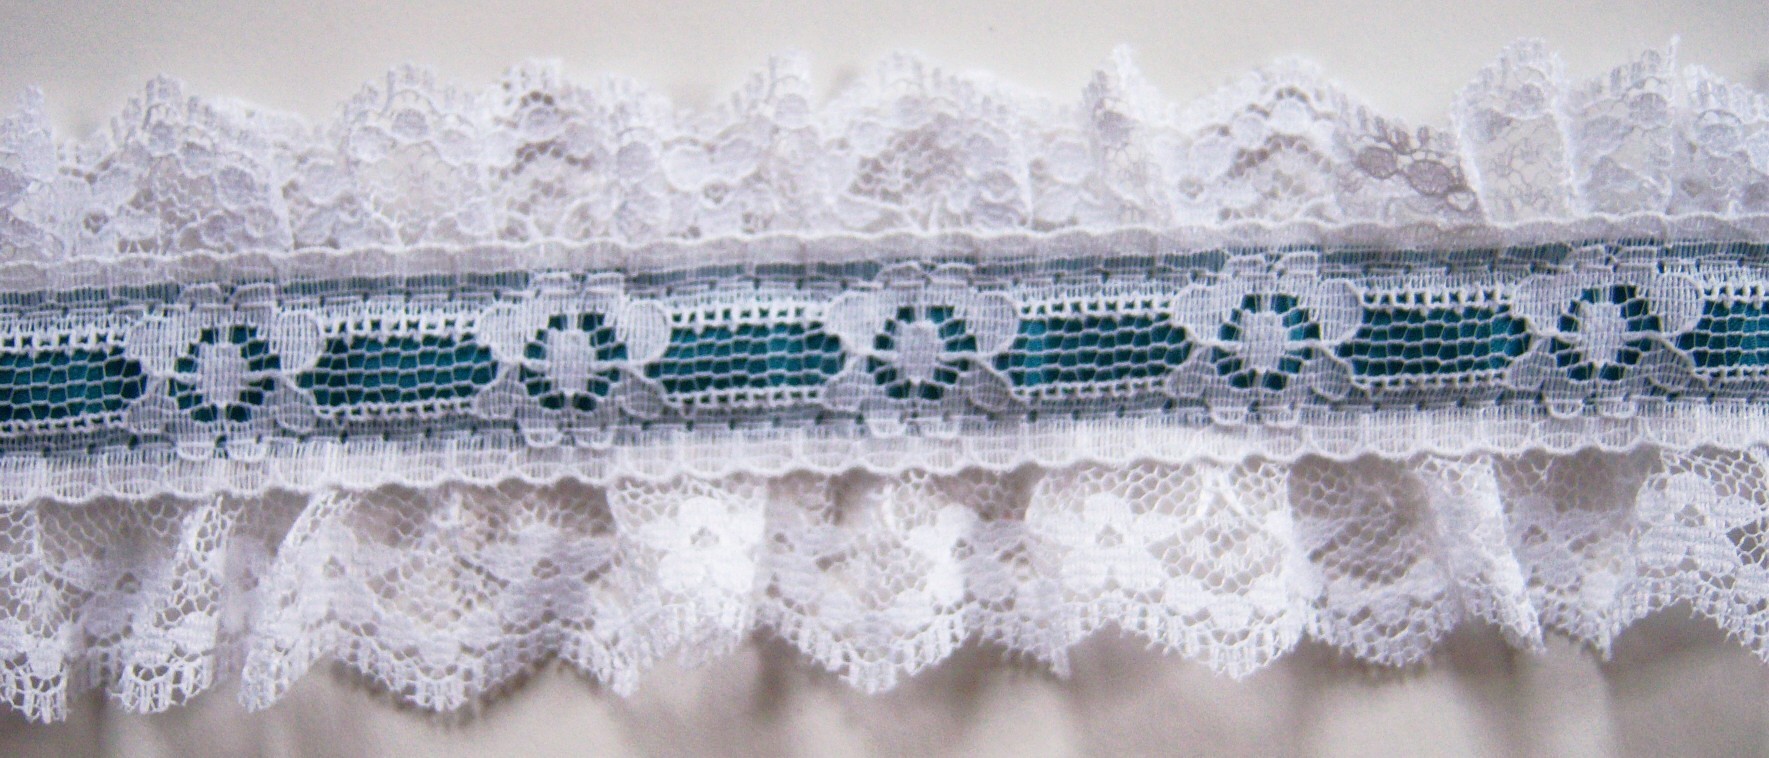 White/Teal Satin 2 3/8" Ruffled Lace